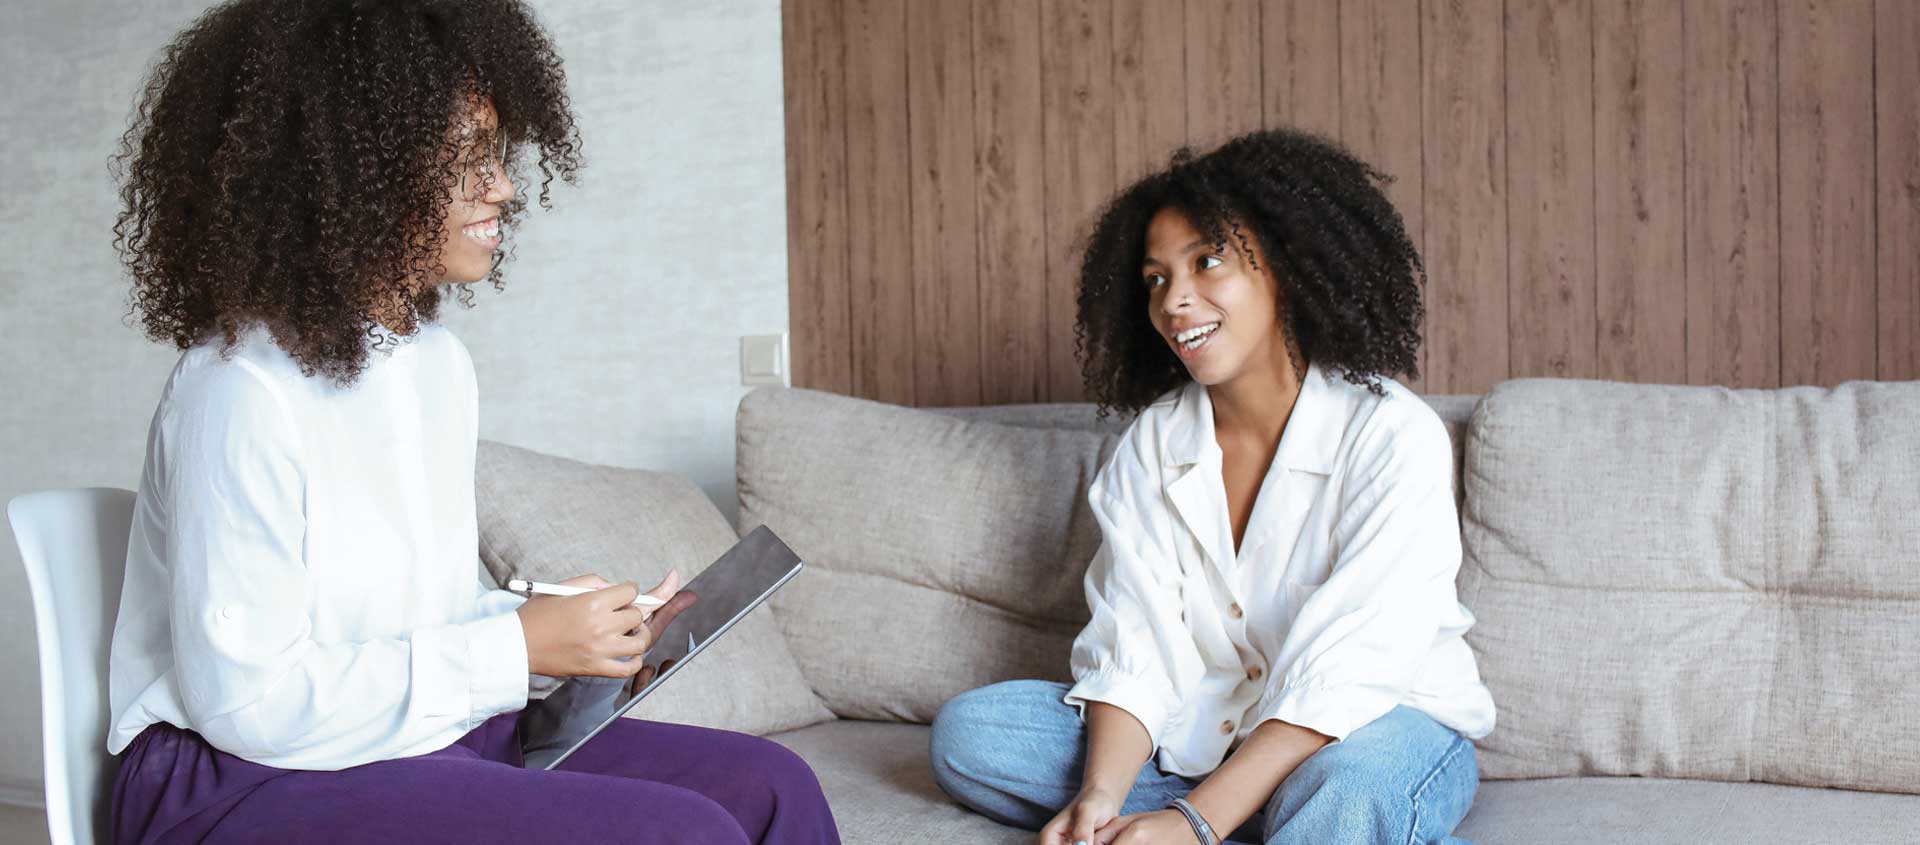 A Black American femal counselor sits on a couch with a pre-teen girl.